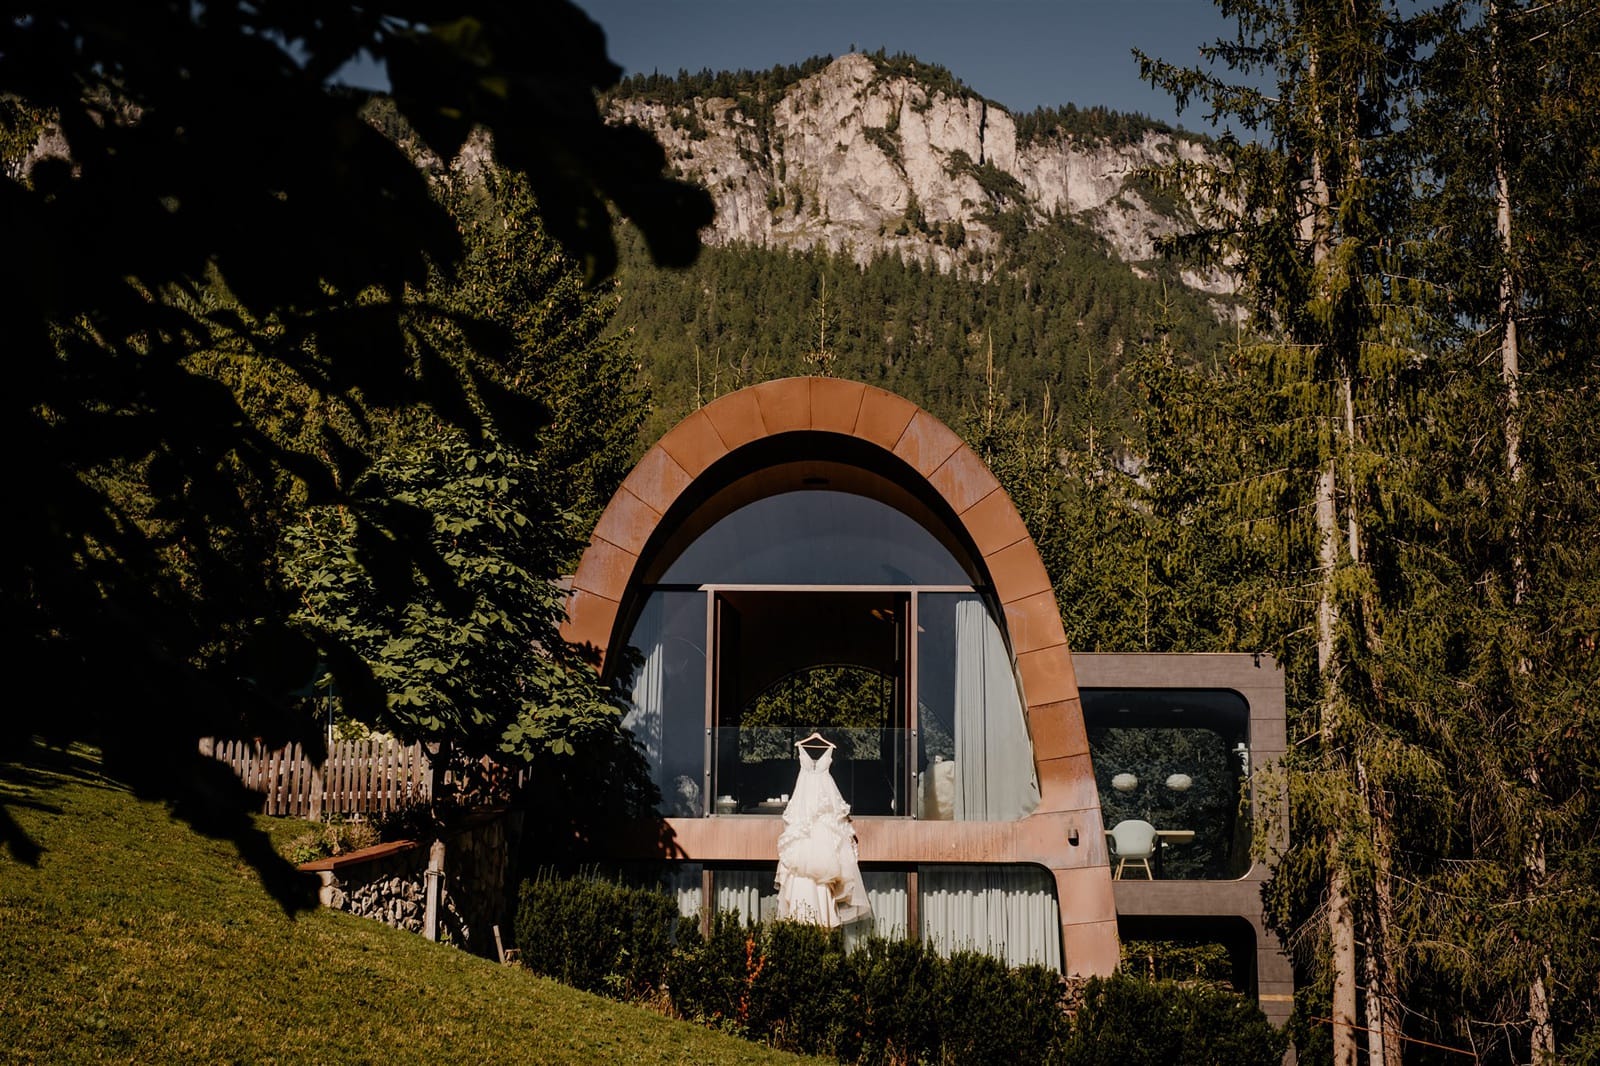 Mi Chalet, a luxury arch-shaped modern chalet in the Dolomites